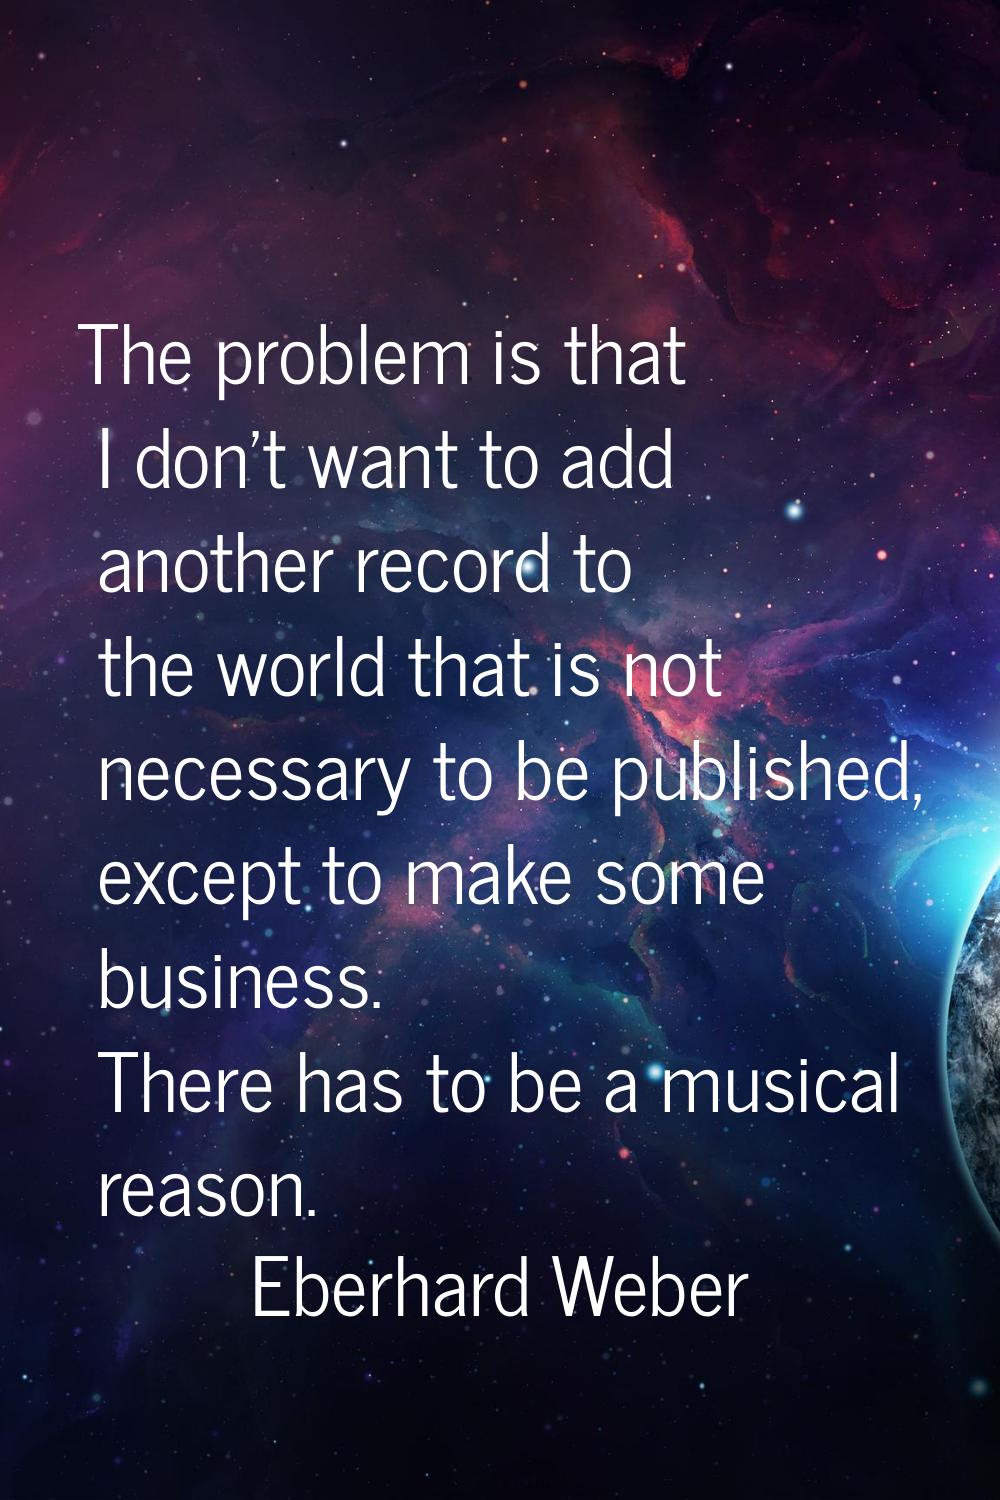 The problem is that I don't want to add another record to the world that is not necessary to be pub